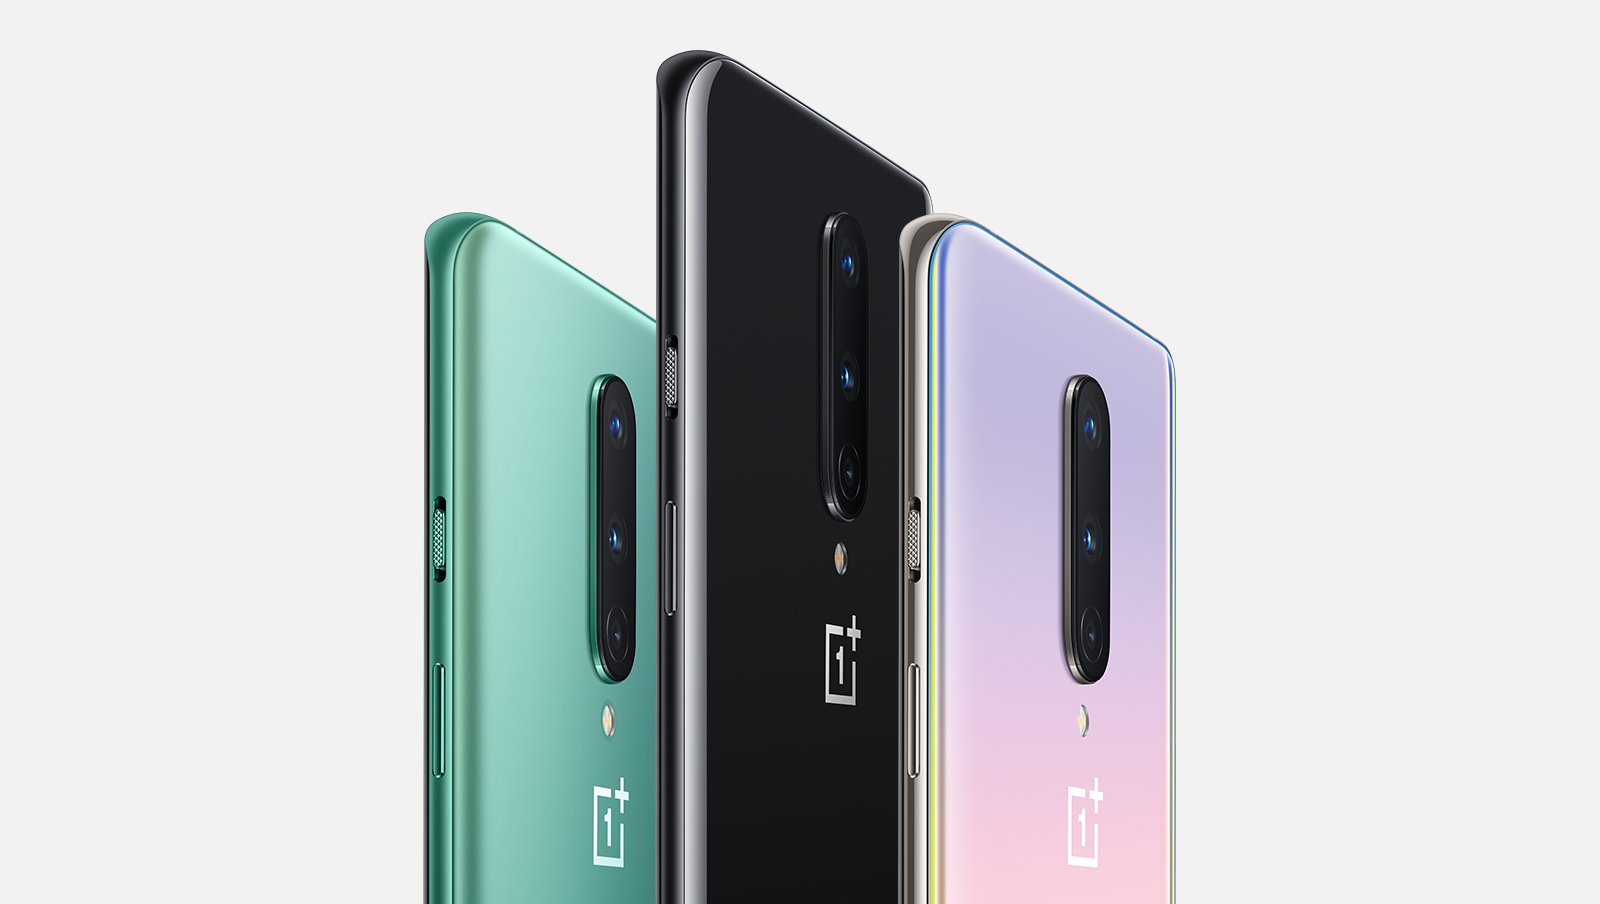 Oneplus 8 Series Joins The Android 5g Flagship Race At The End Of